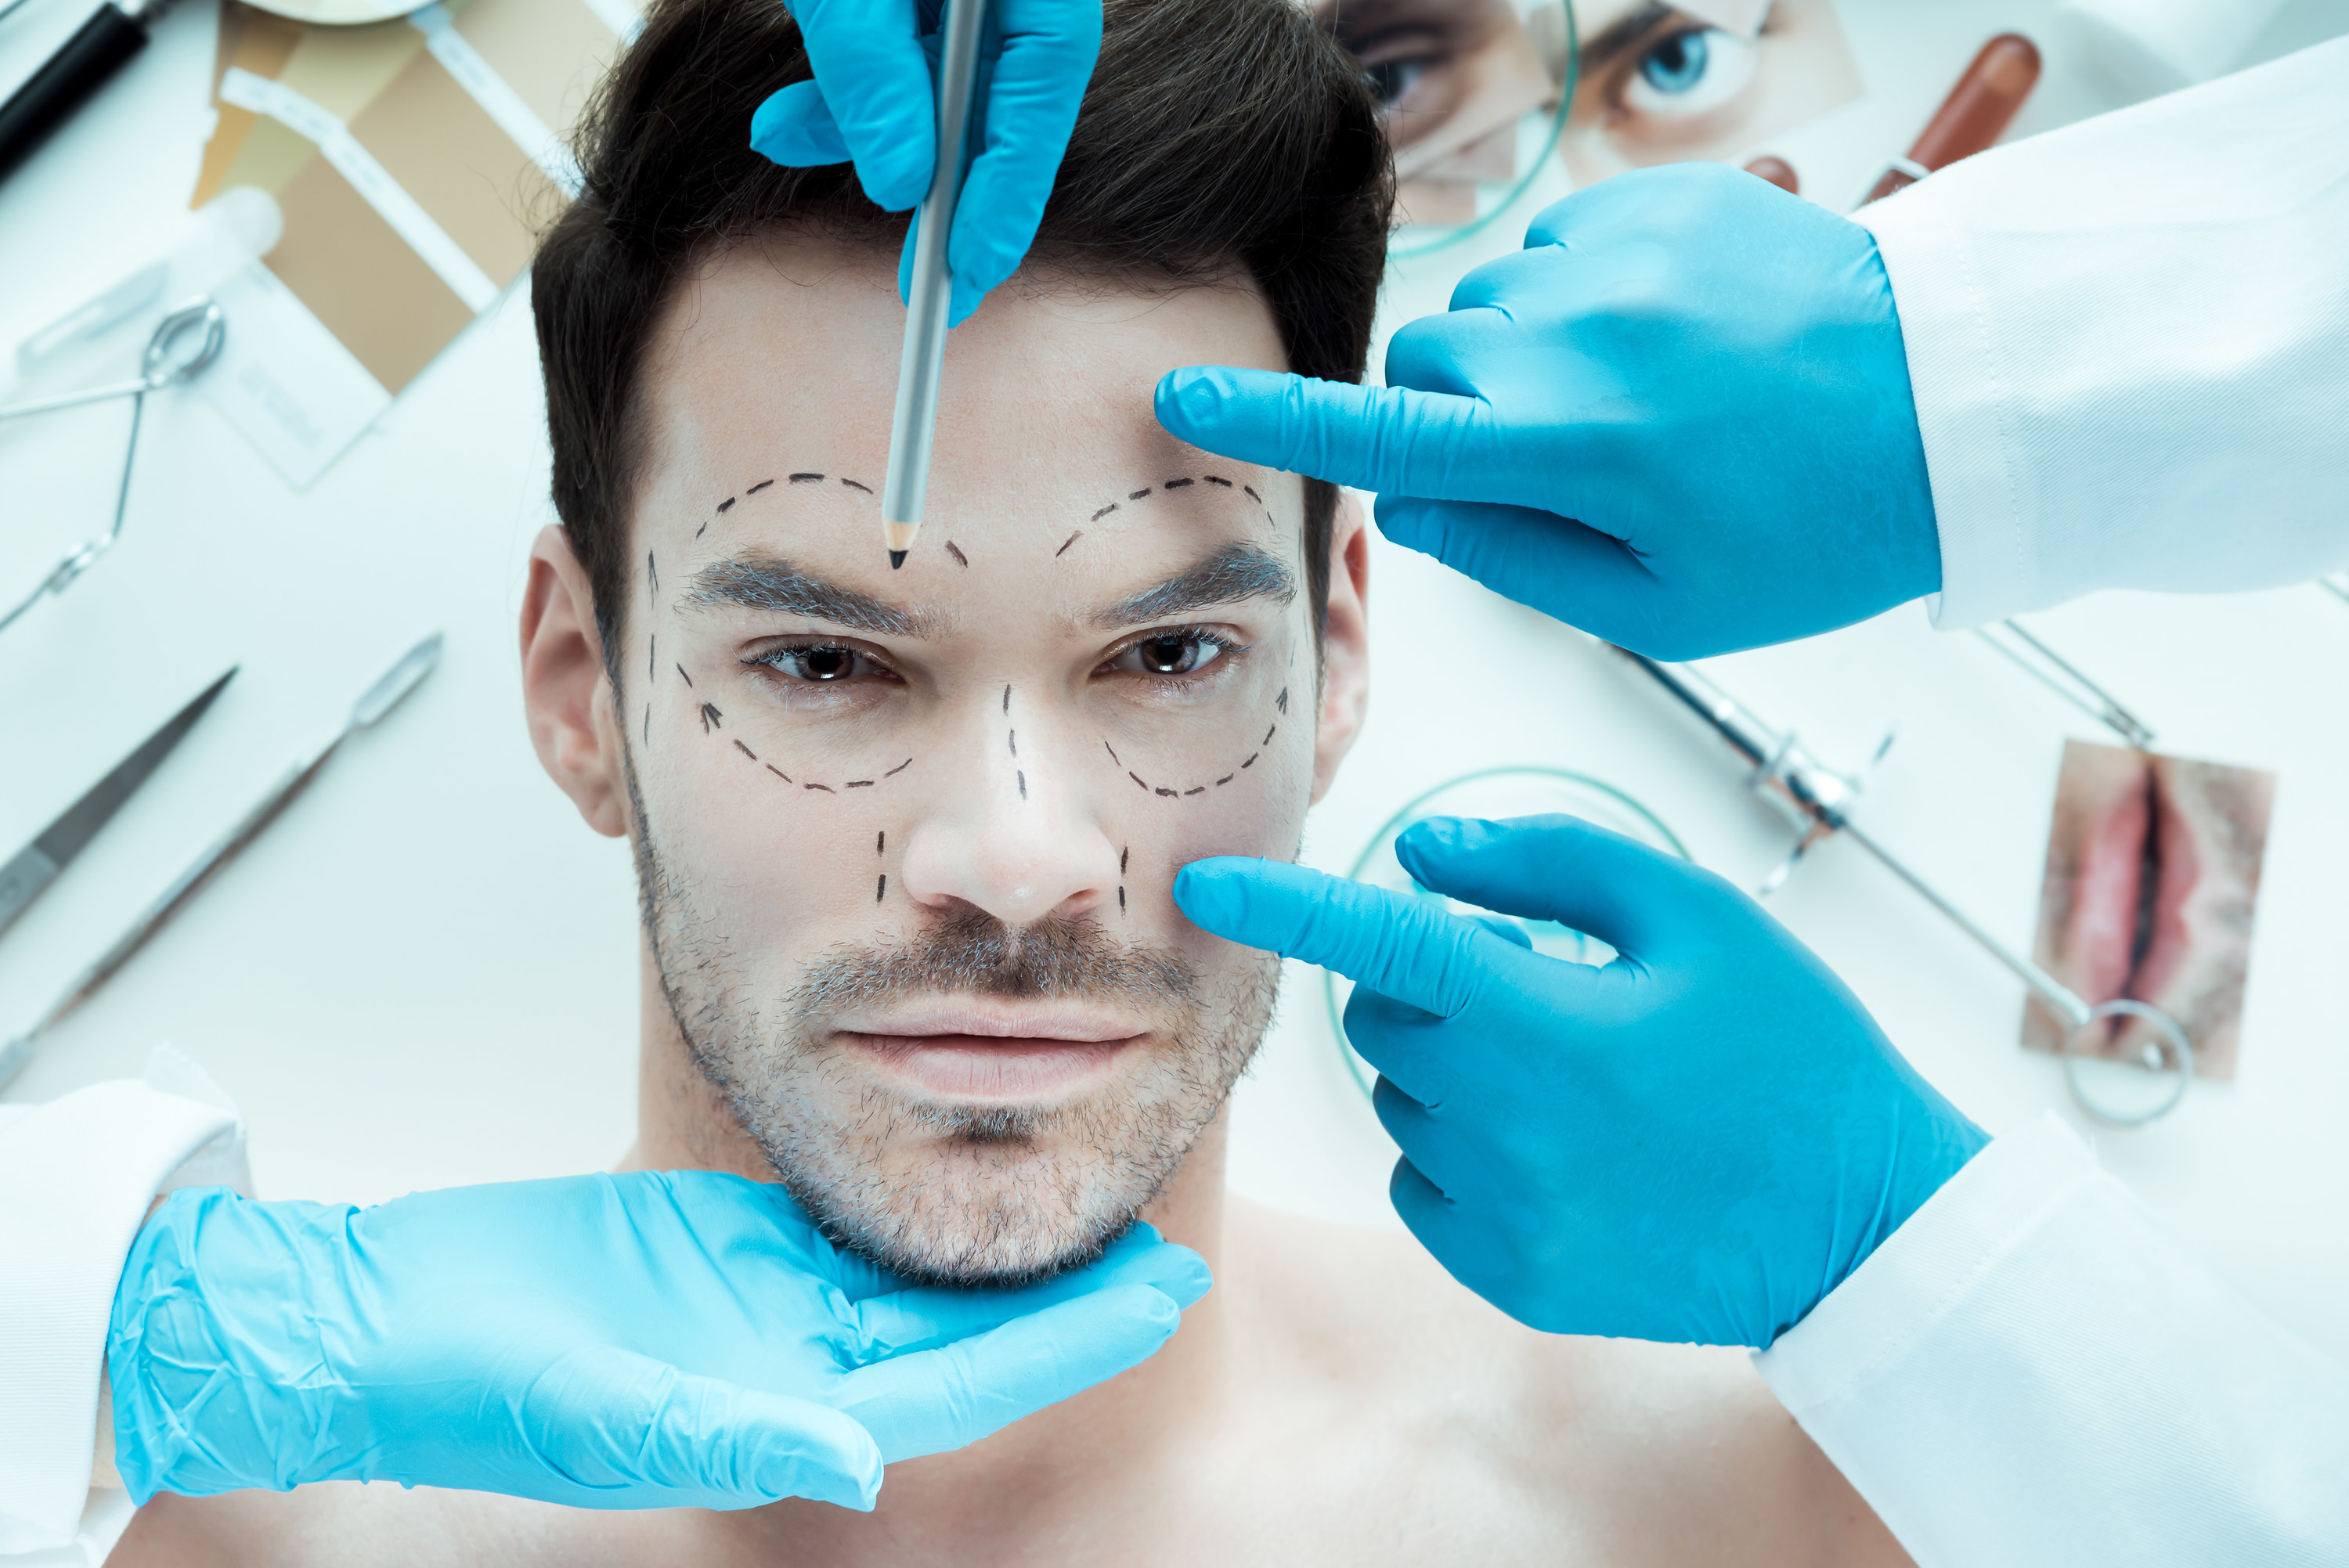 A man has lines drawn on his face and doctors inspecting him prior to a cosmetic procedure